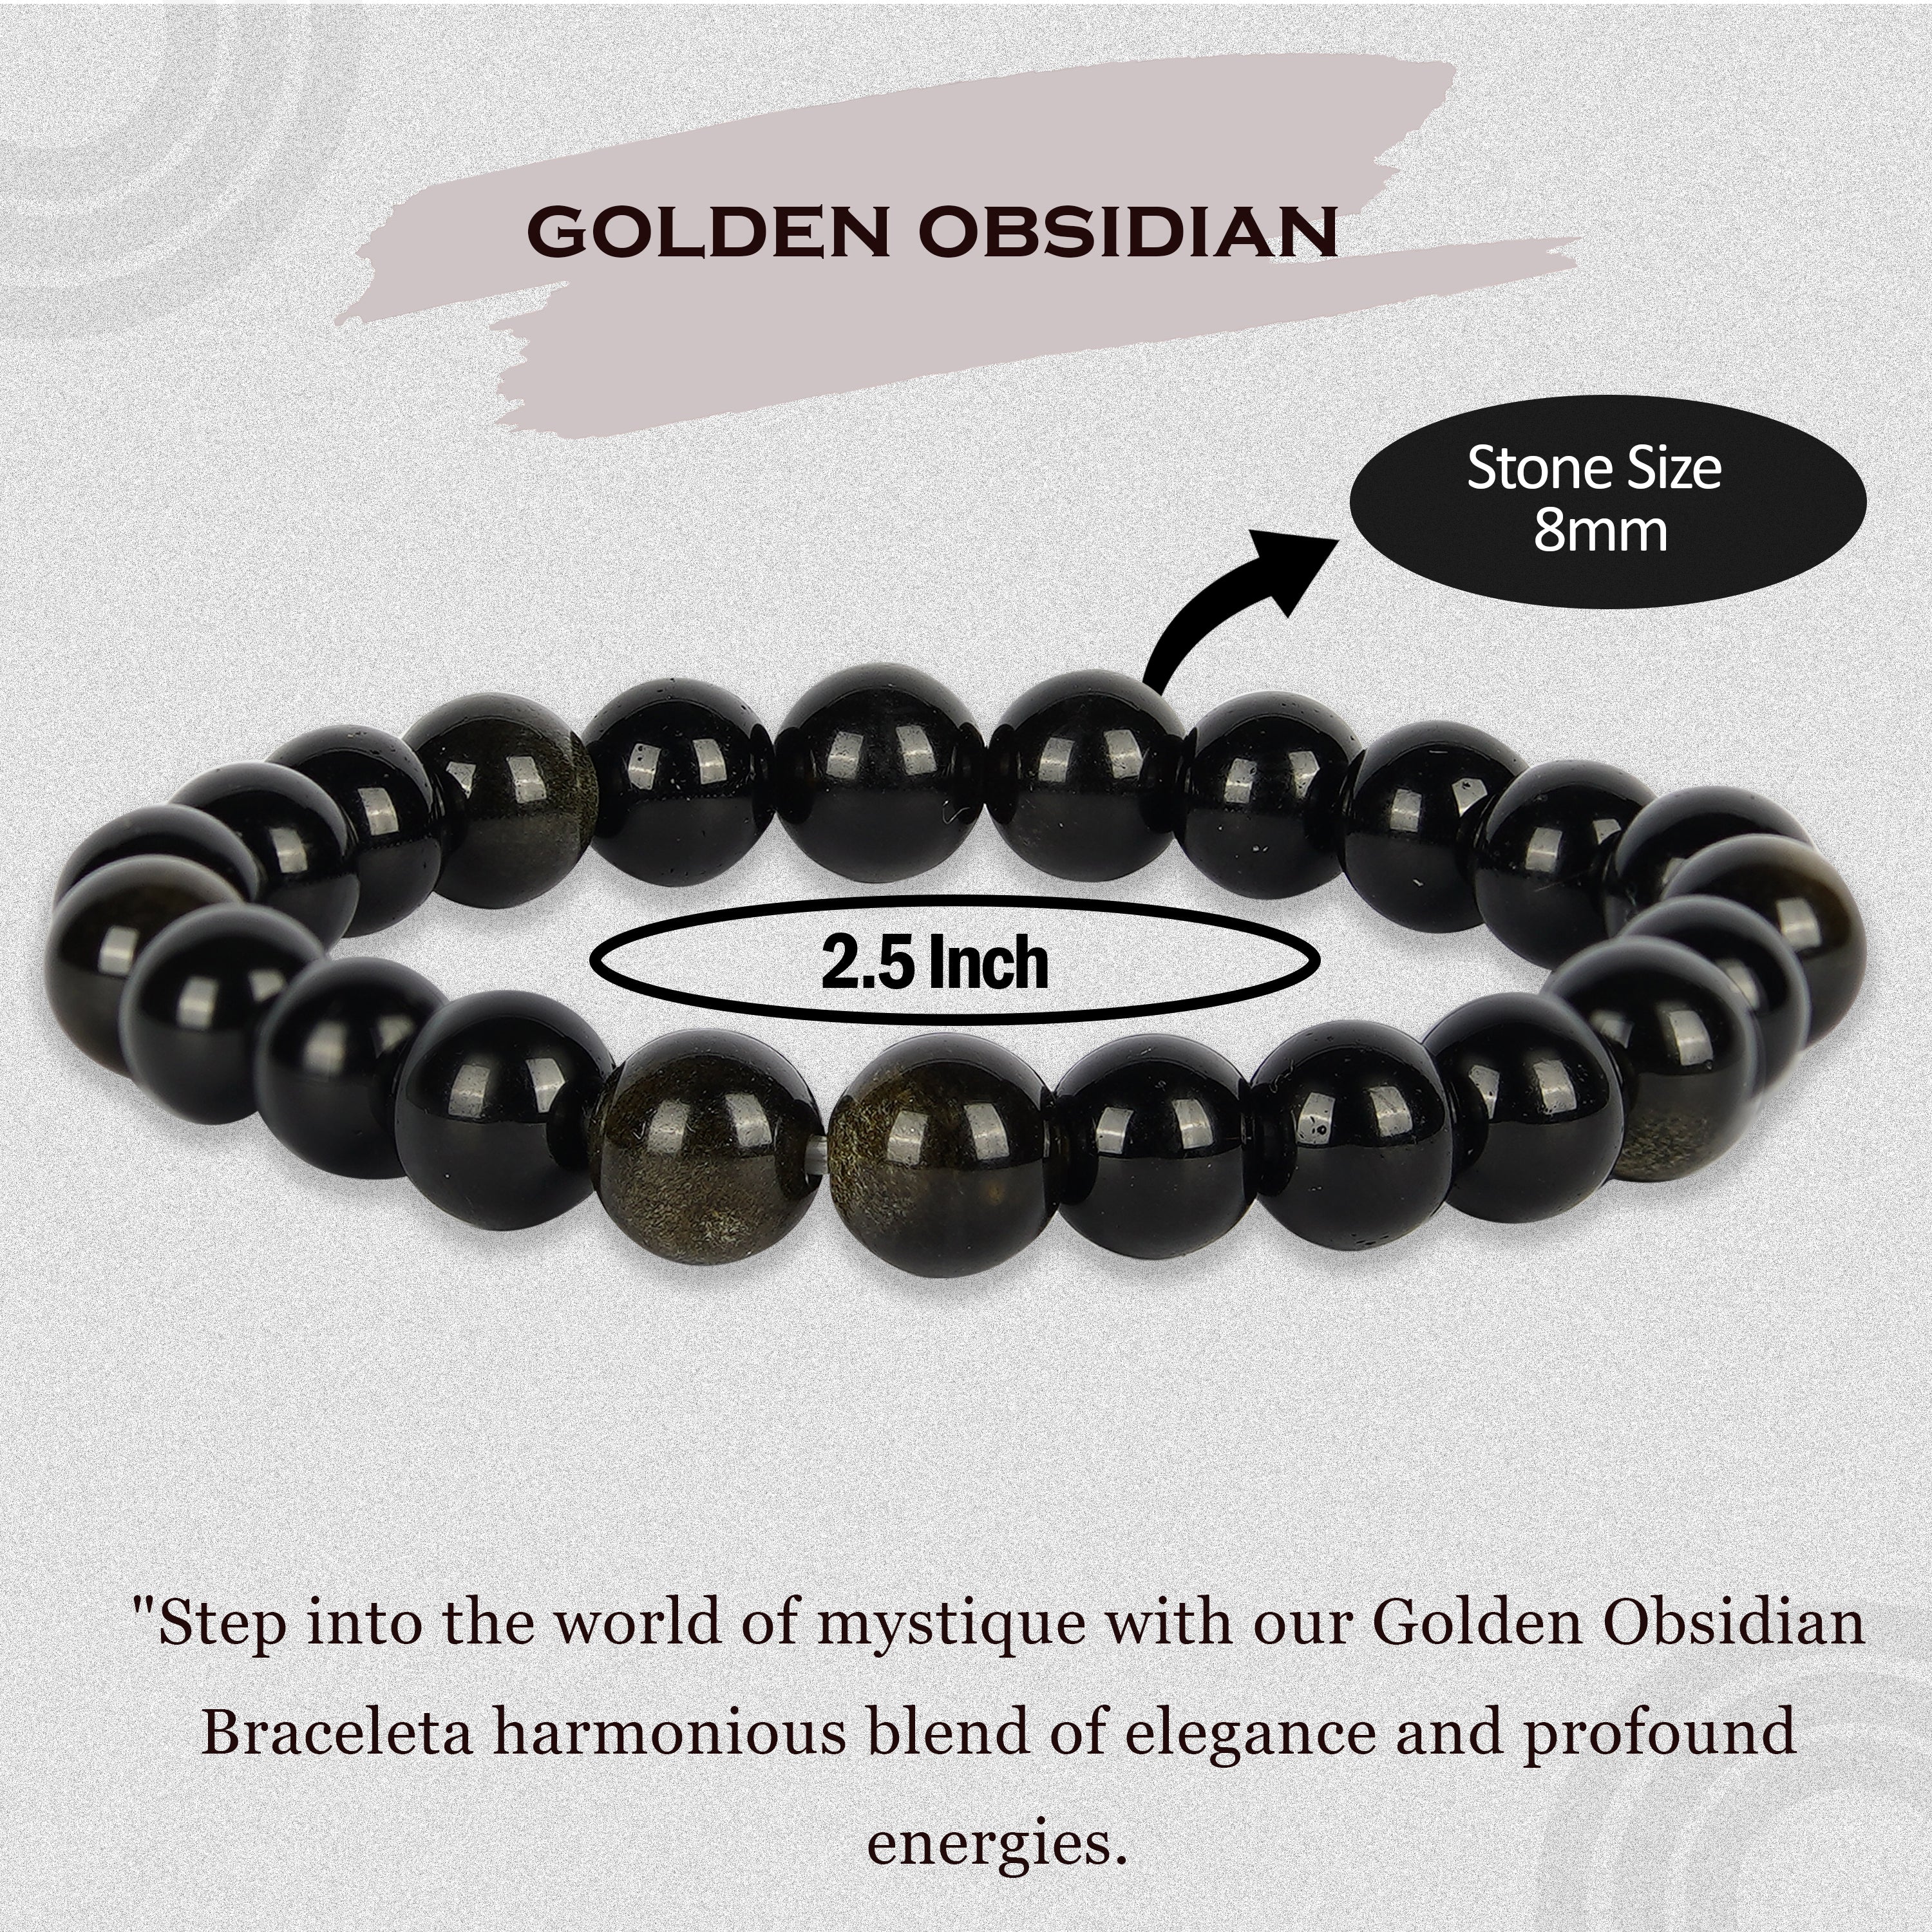 Certified Black Obsidian 8 Mm Round Bead Bracelet With Certificate